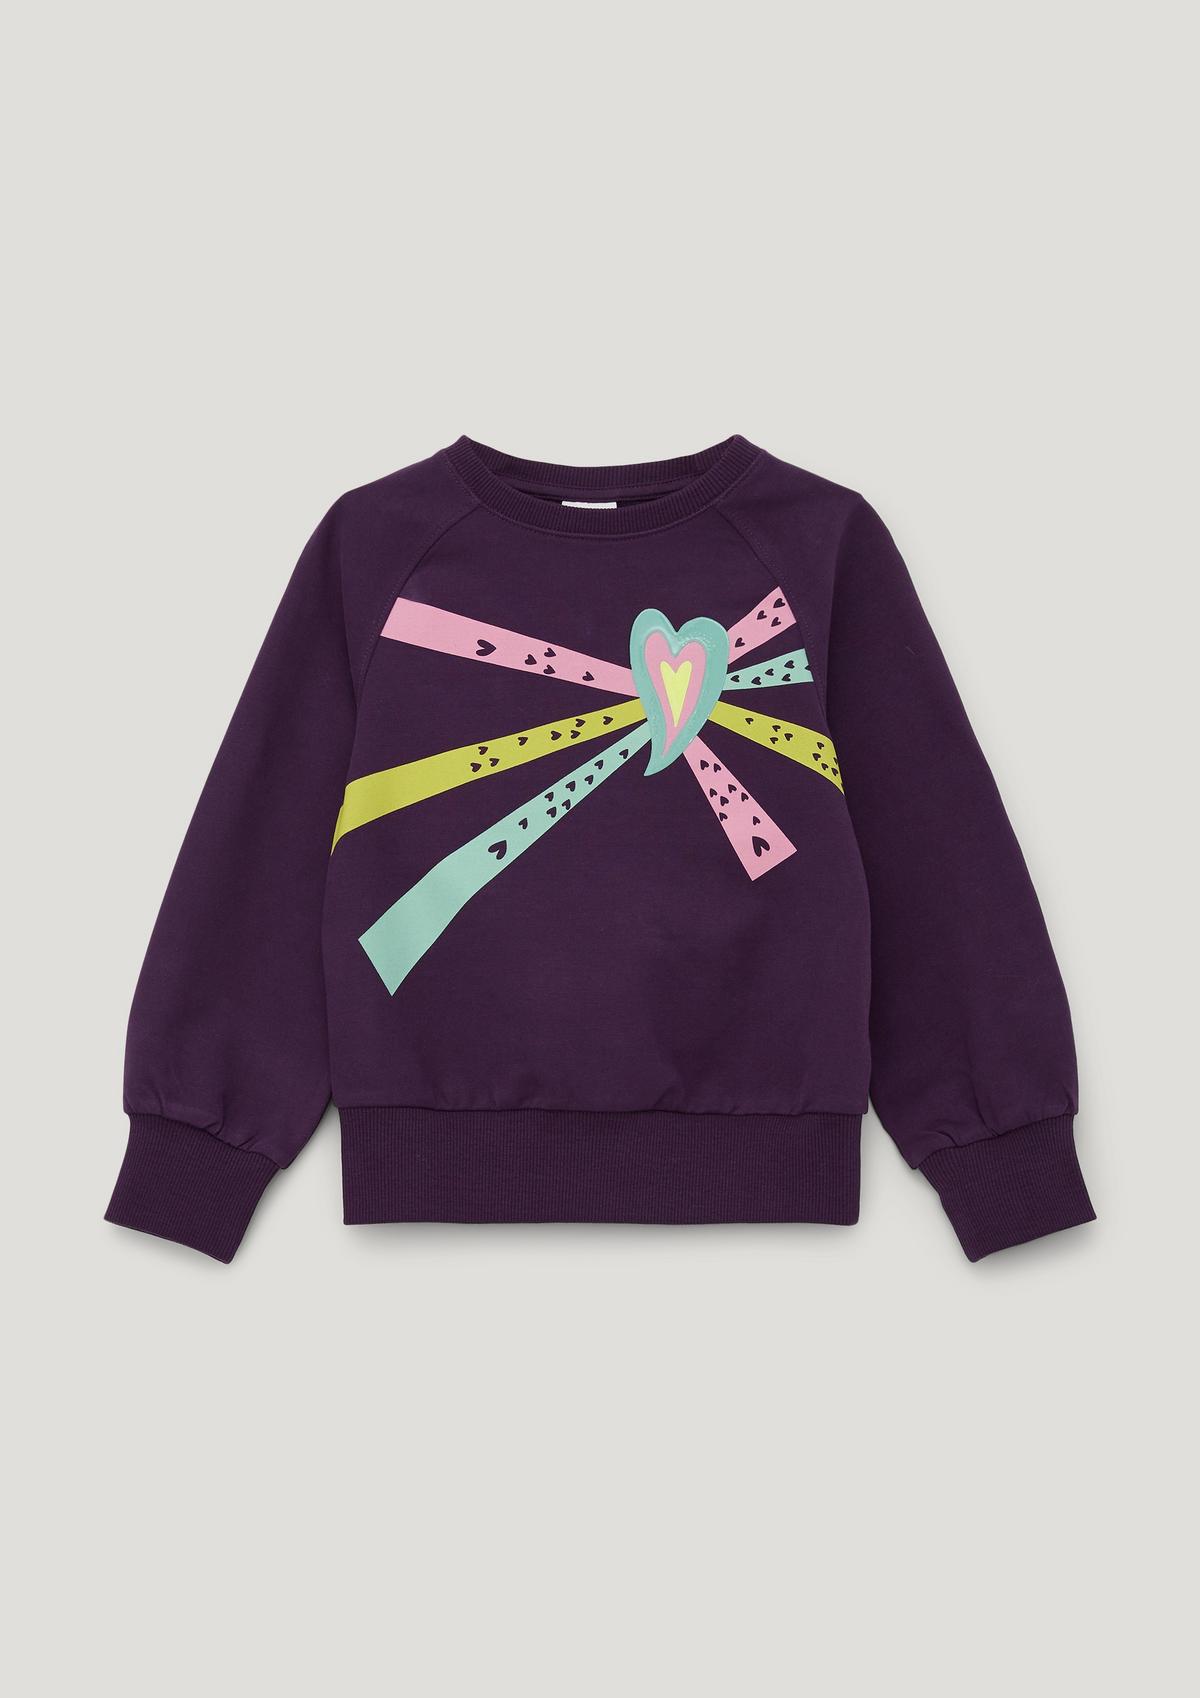 s.Oliver Sweatshirt with a shiny front print